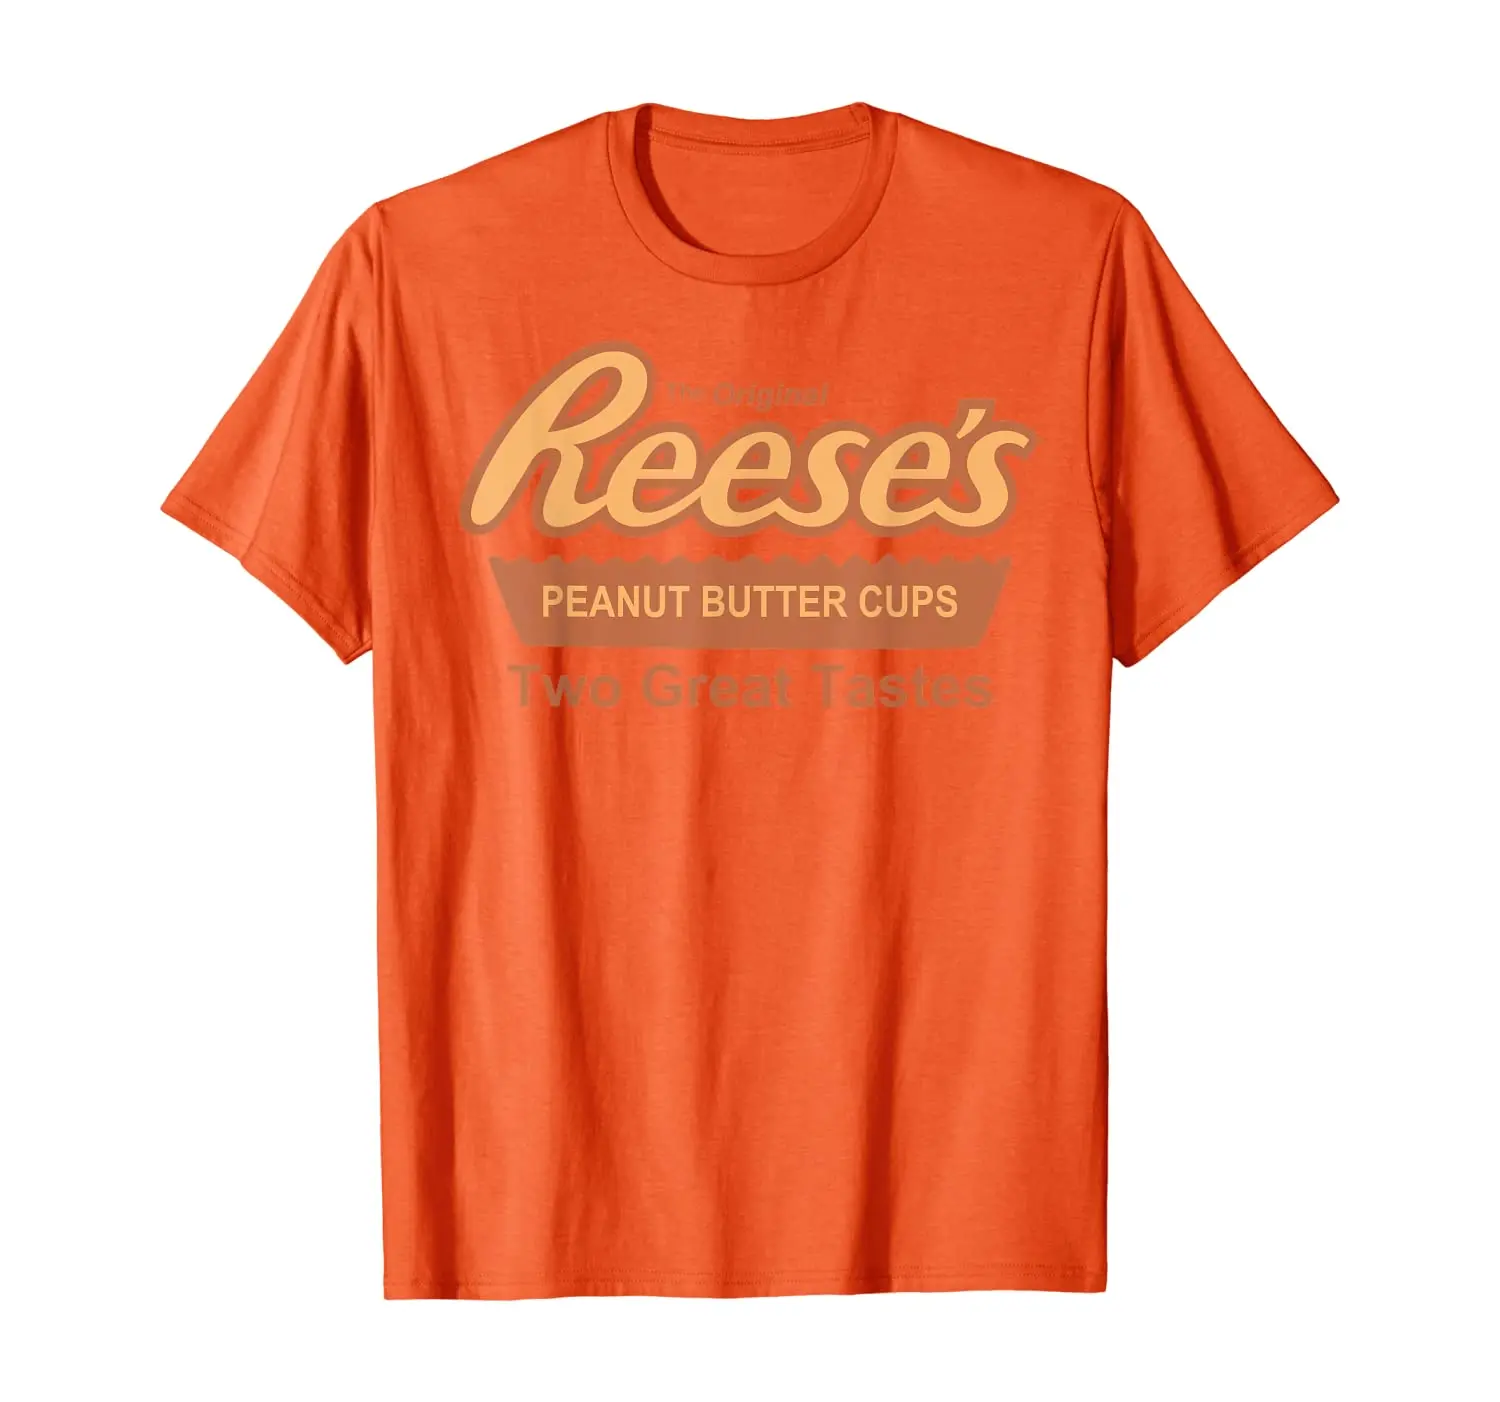 

The Original Reese's-Peanut Butter Cups Two Great Tastes T-Shirt